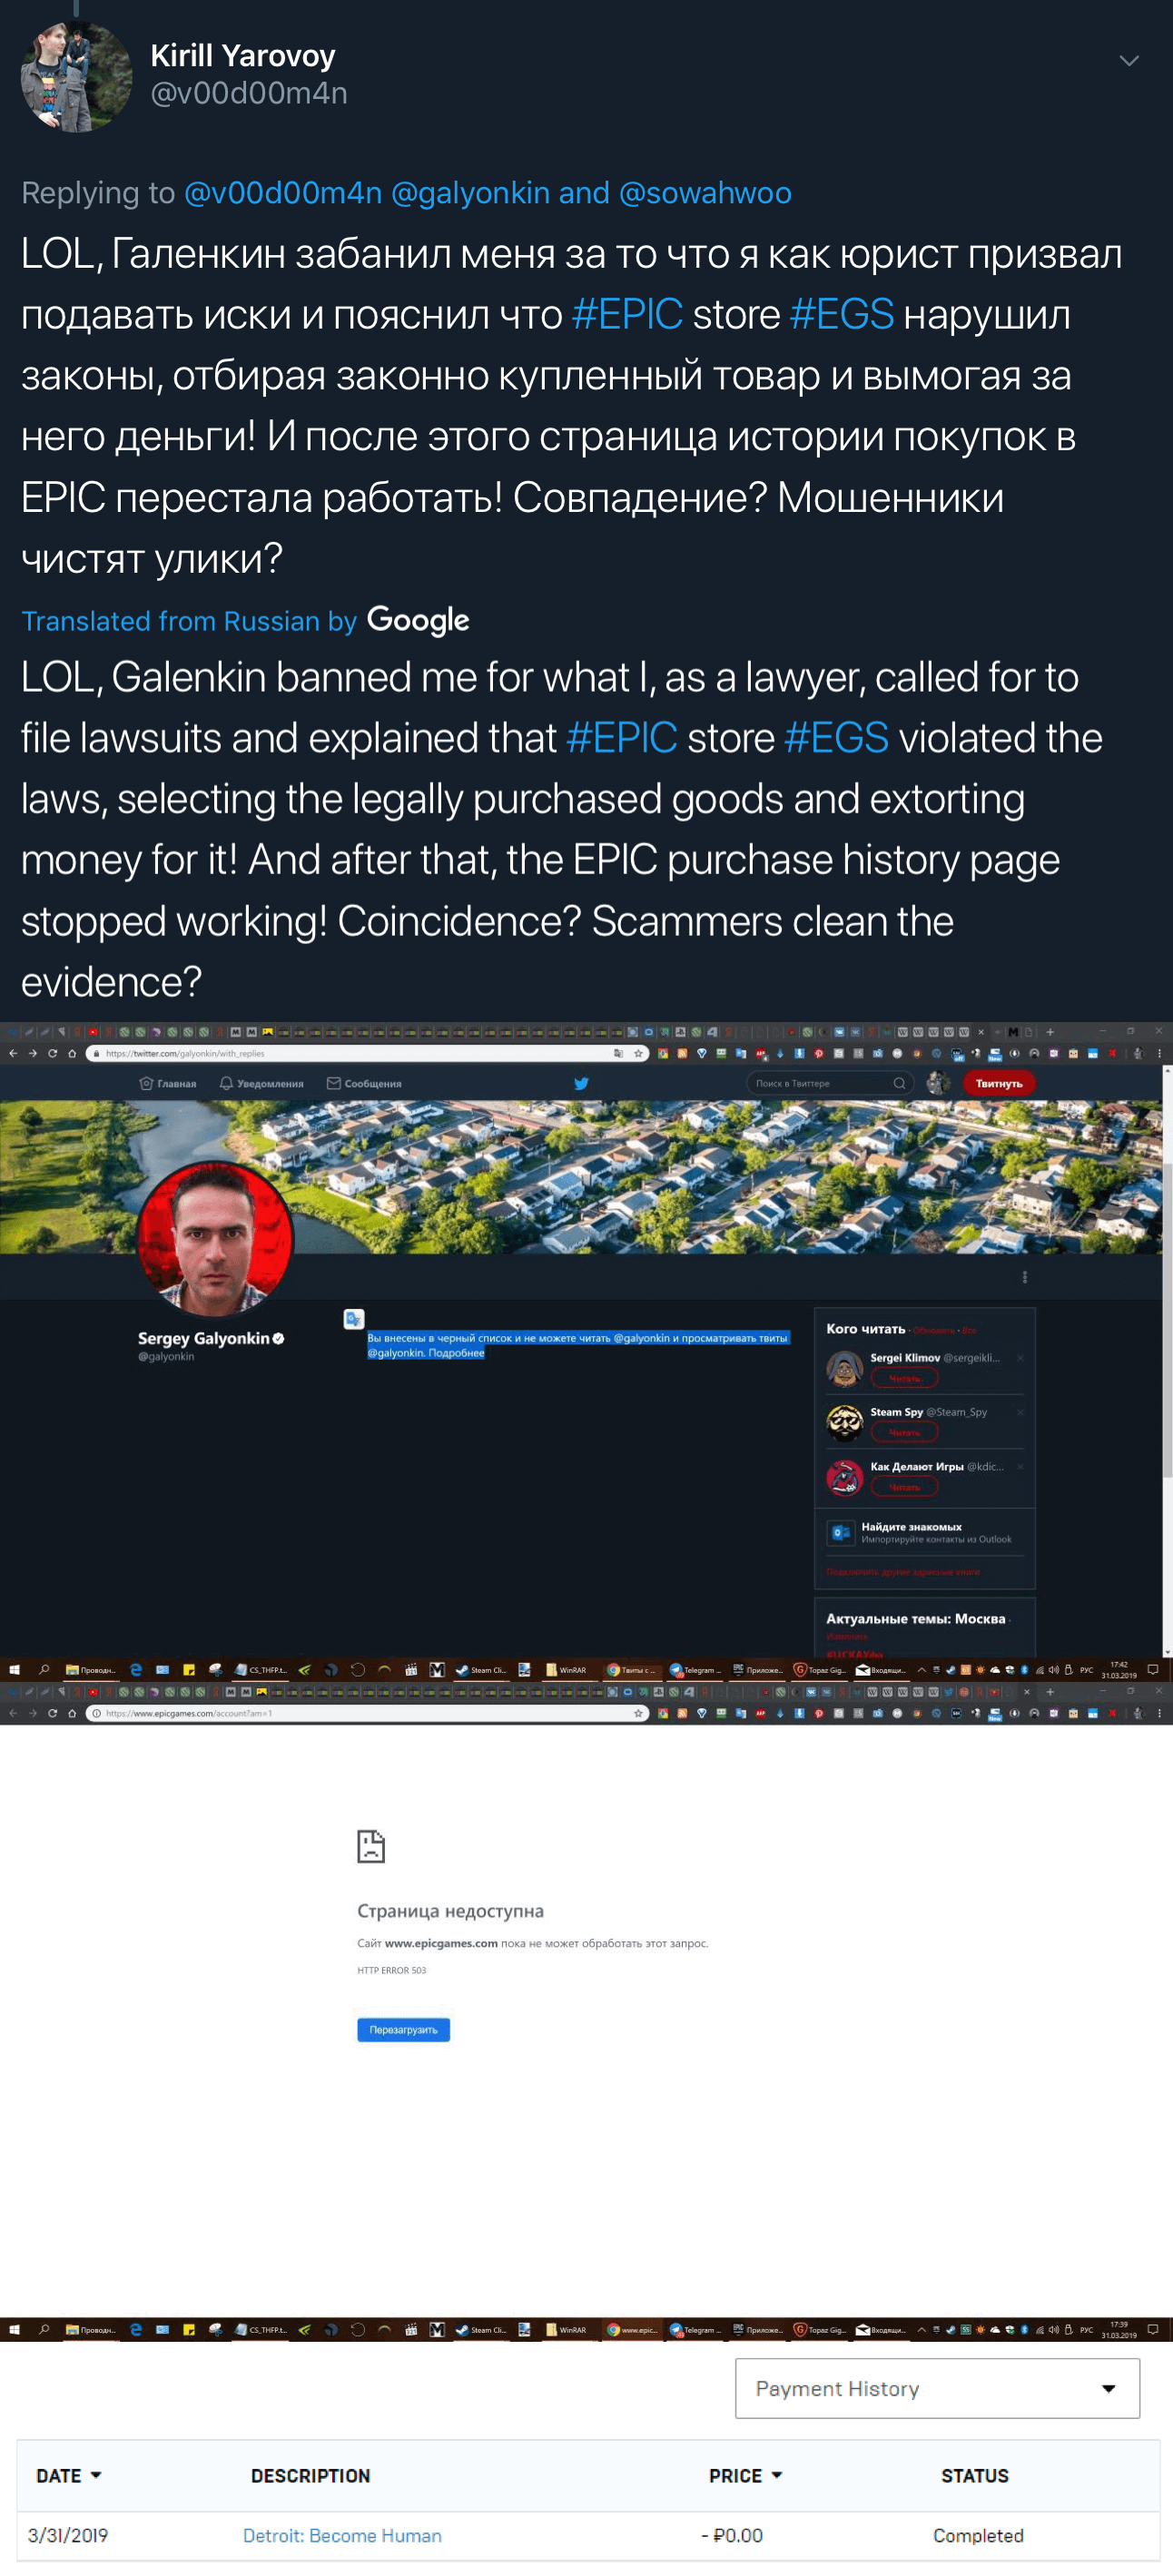 A Twitter user saying their Epic Games purchase history page has become unavailable and that Sergey Galyonkin has blocked them on Twitter.